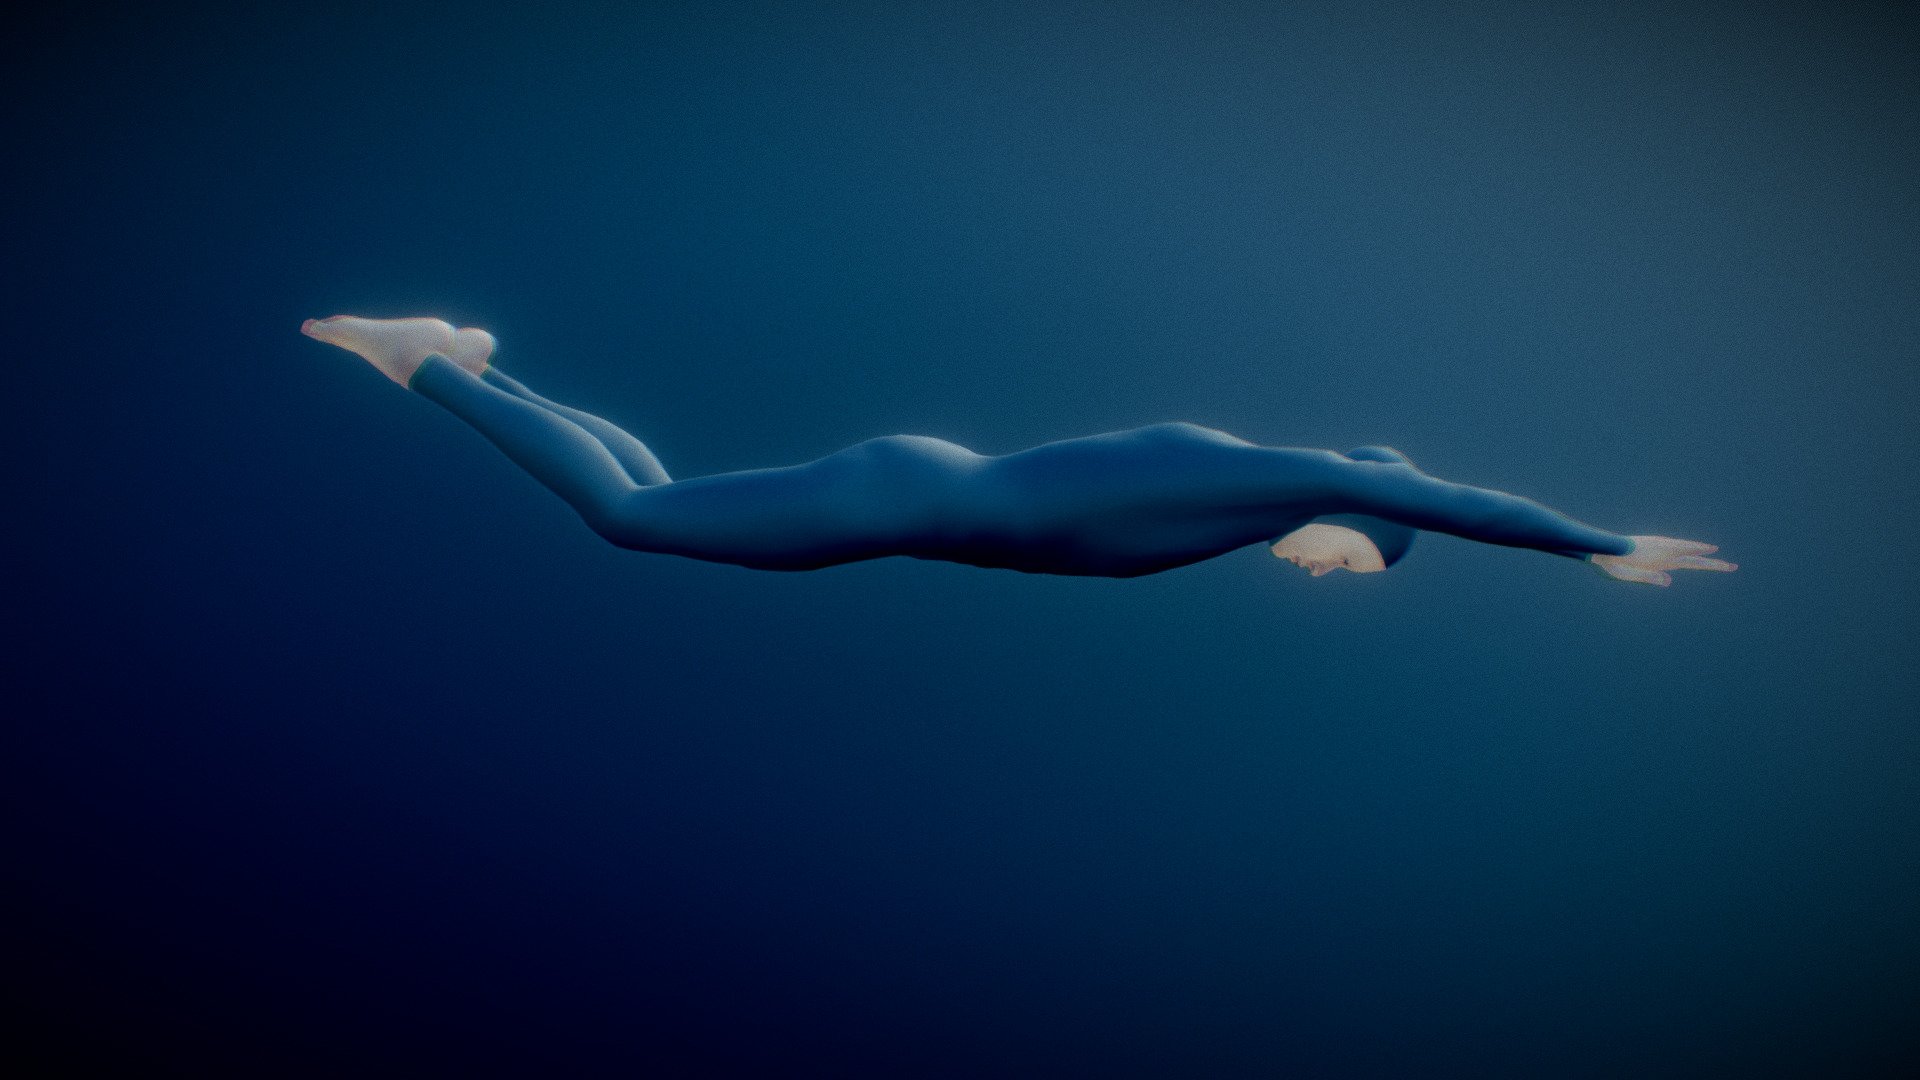 Aka: A Crappy Animator - 3

Making tests to animate the dolphin kick movement, in order to later recreate freediving underwater scenes.

The model and armature were created in makehuman, and animated in blender using keyframes. 

As the movement was irregular, I had to use &ldquo;Smooth keys